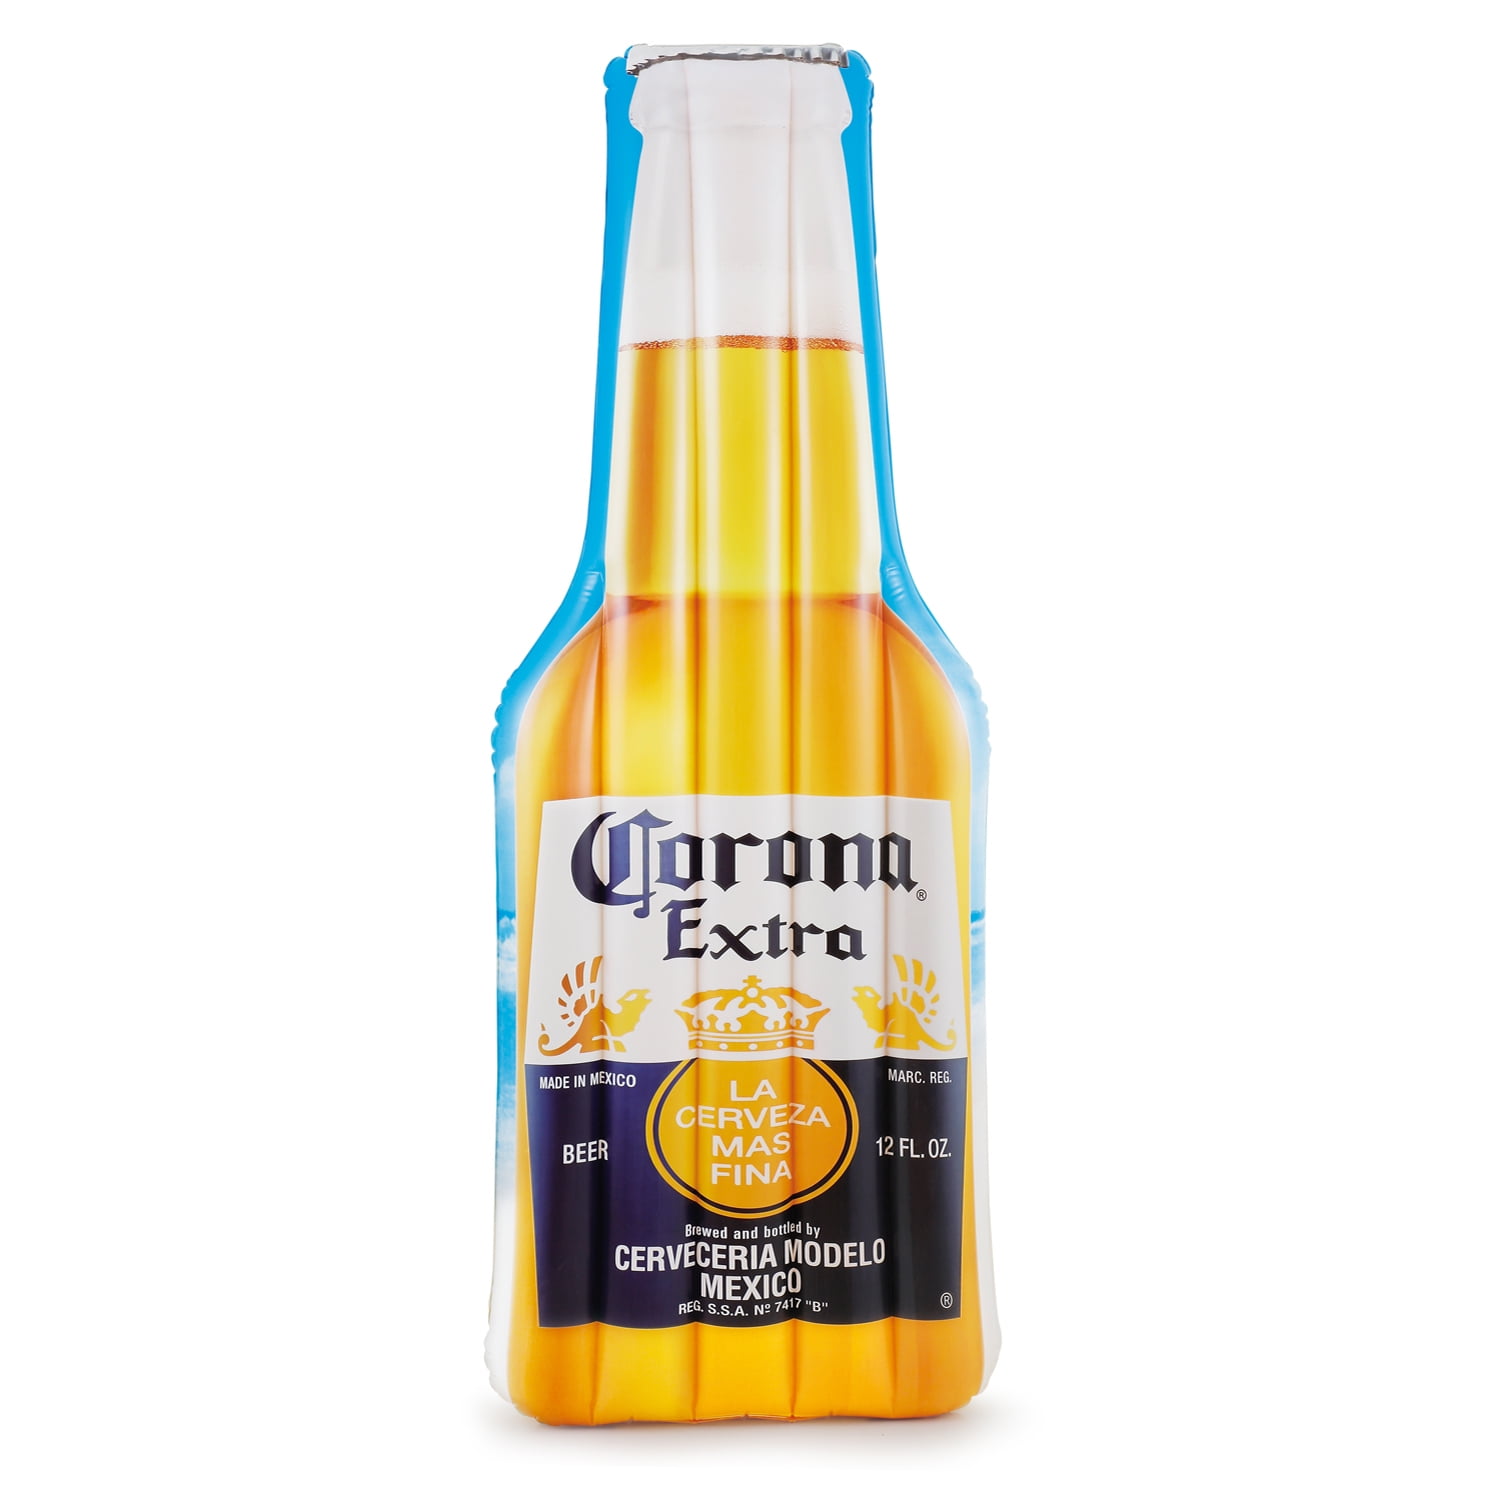 New CORONA Light INFLATABLE BOTTLE Beer Advertising Promo New In Package 2’ Tall